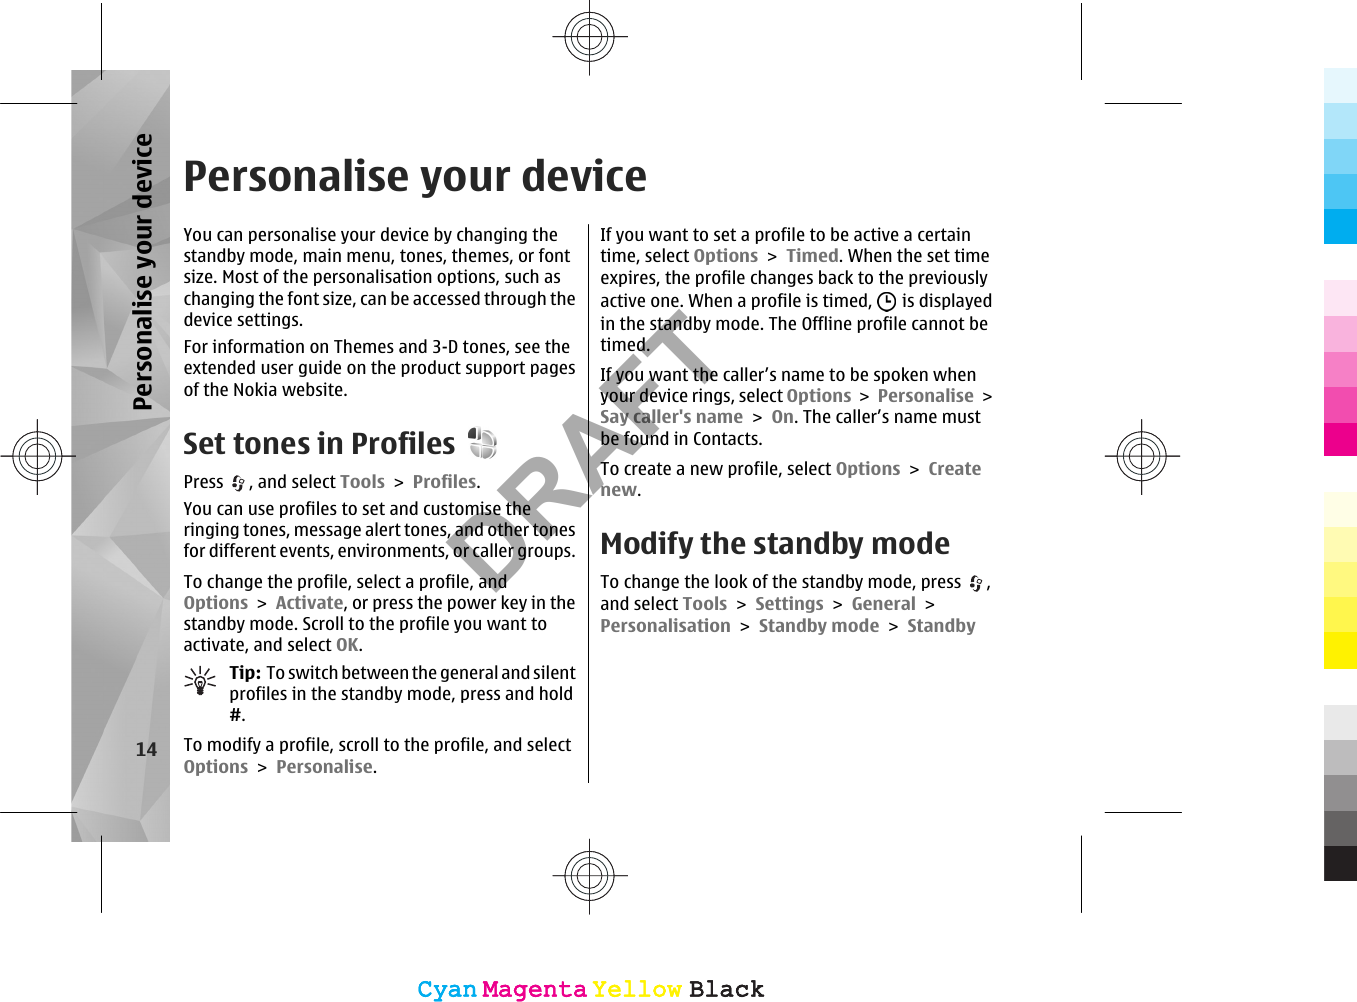 Personalise your deviceYou can personalise your device by changing thestandby mode, main menu, tones, themes, or fontsize. Most of the personalisation options, such aschanging the font size, can be accessed through thedevice settings.For information on Themes and 3-D tones, see theextended user guide on the product support pagesof the Nokia website.Set tones in ProfilesPress  , and select Tools &gt; Profiles.You can use profiles to set and customise theringing tones, message alert tones, and other tonesfor different events, environments, or caller groups.To change the profile, select a profile, andOptions &gt; Activate, or press the power key in thestandby mode. Scroll to the profile you want toactivate, and select OK.Tip:  To switch between the general and silentprofiles in the standby mode, press and hold#.To modify a profile, scroll to the profile, and selectOptions &gt; Personalise.If you want to set a profile to be active a certaintime, select Options &gt; Timed. When the set timeexpires, the profile changes back to the previouslyactive one. When a profile is timed,   is displayedin the standby mode. The Offline profile cannot betimed.If you want the caller’s name to be spoken whenyour device rings, select Options &gt; Personalise &gt;Say caller&apos;s name &gt; On. The caller’s name mustbe found in Contacts.To create a new profile, select Options &gt; Createnew.Modify the standby modeTo change the look of the standby mode, press  ,and select Tools &gt; Settings &gt; General &gt;Personalisation &gt; Standby mode &gt; Standby14Personalise your deviceCyanCyanMagentaMagentaYellowYellowBlackBlackCyanCyanMagentaMagentaYellowYellowBlackBlackDRAFT